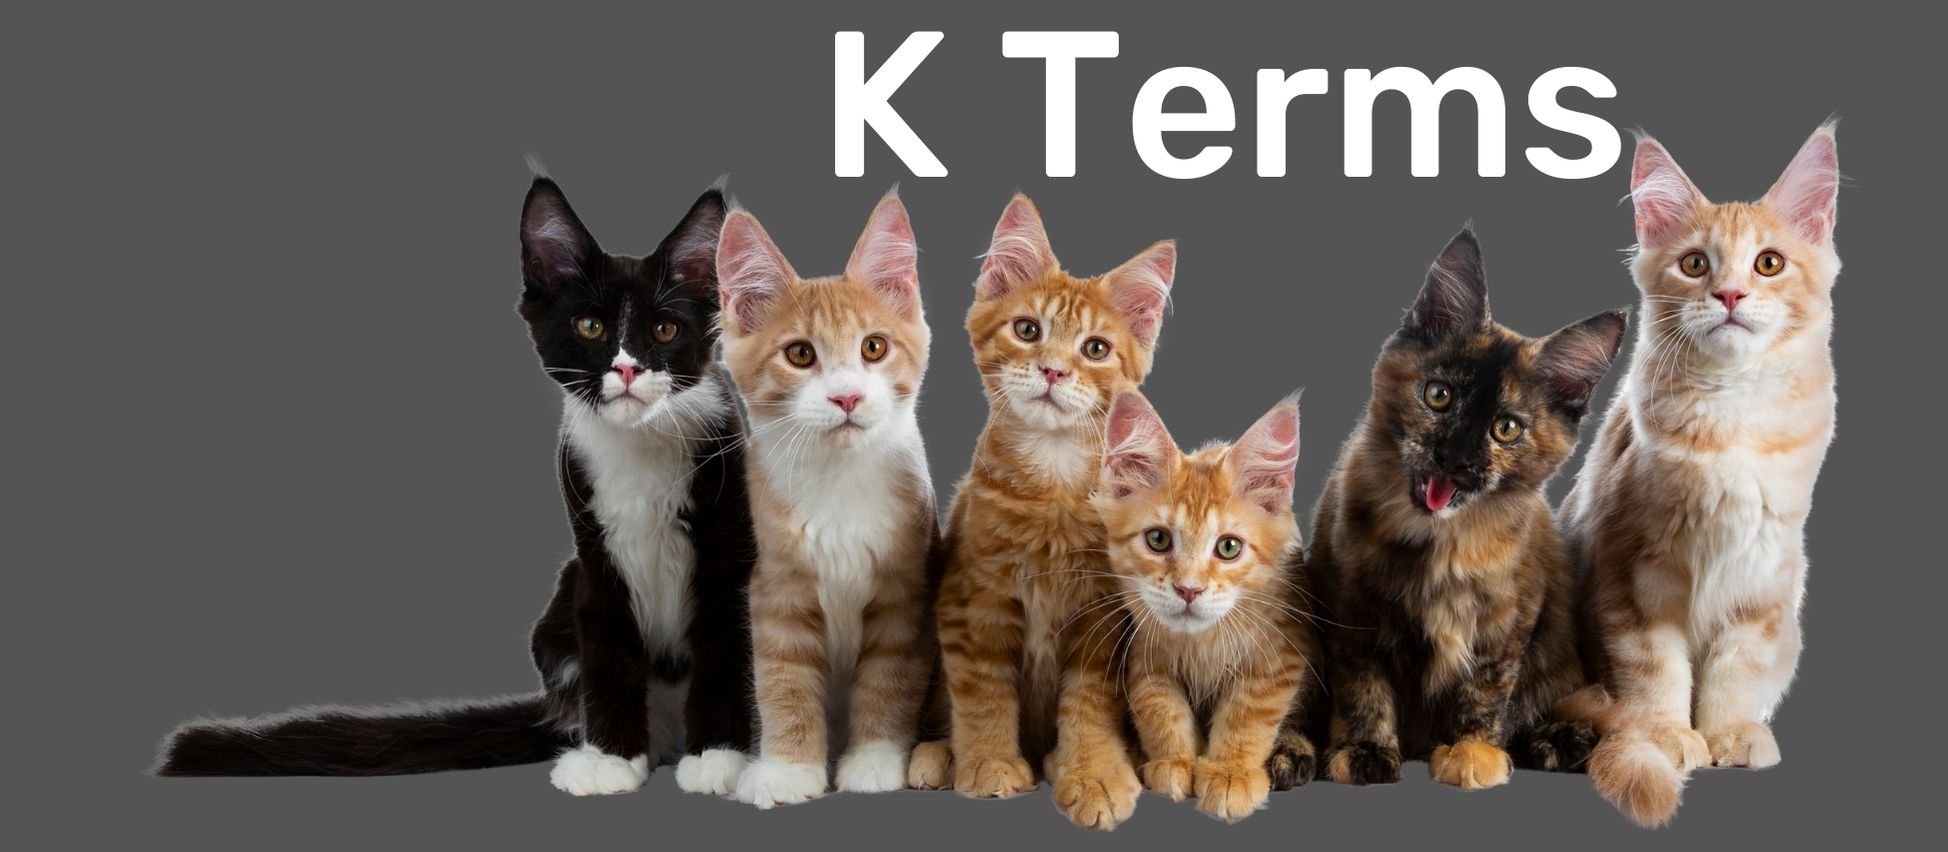 Group of six cats in front of a gray background with text reading 'K Terms' at the top to indicate a new section of the glossary